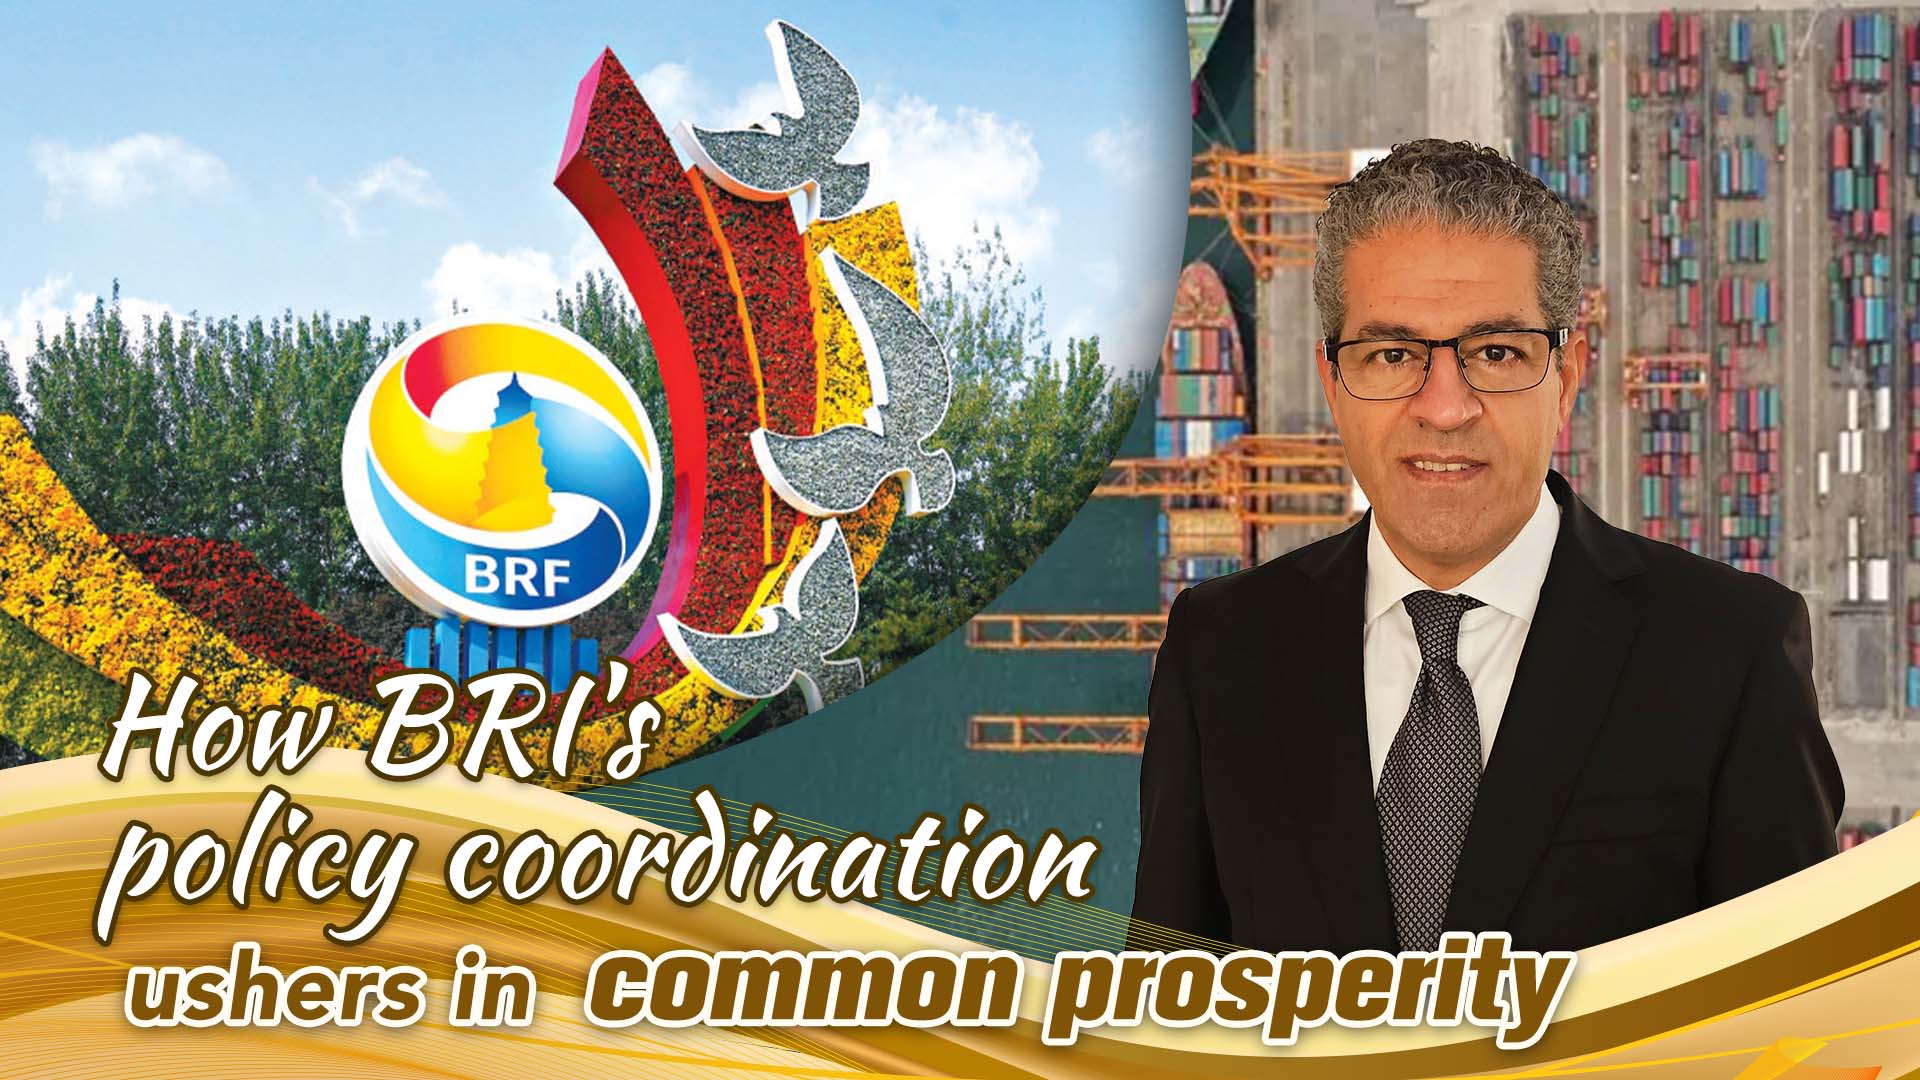 How BRI's policy coordination ushers in common prosperity